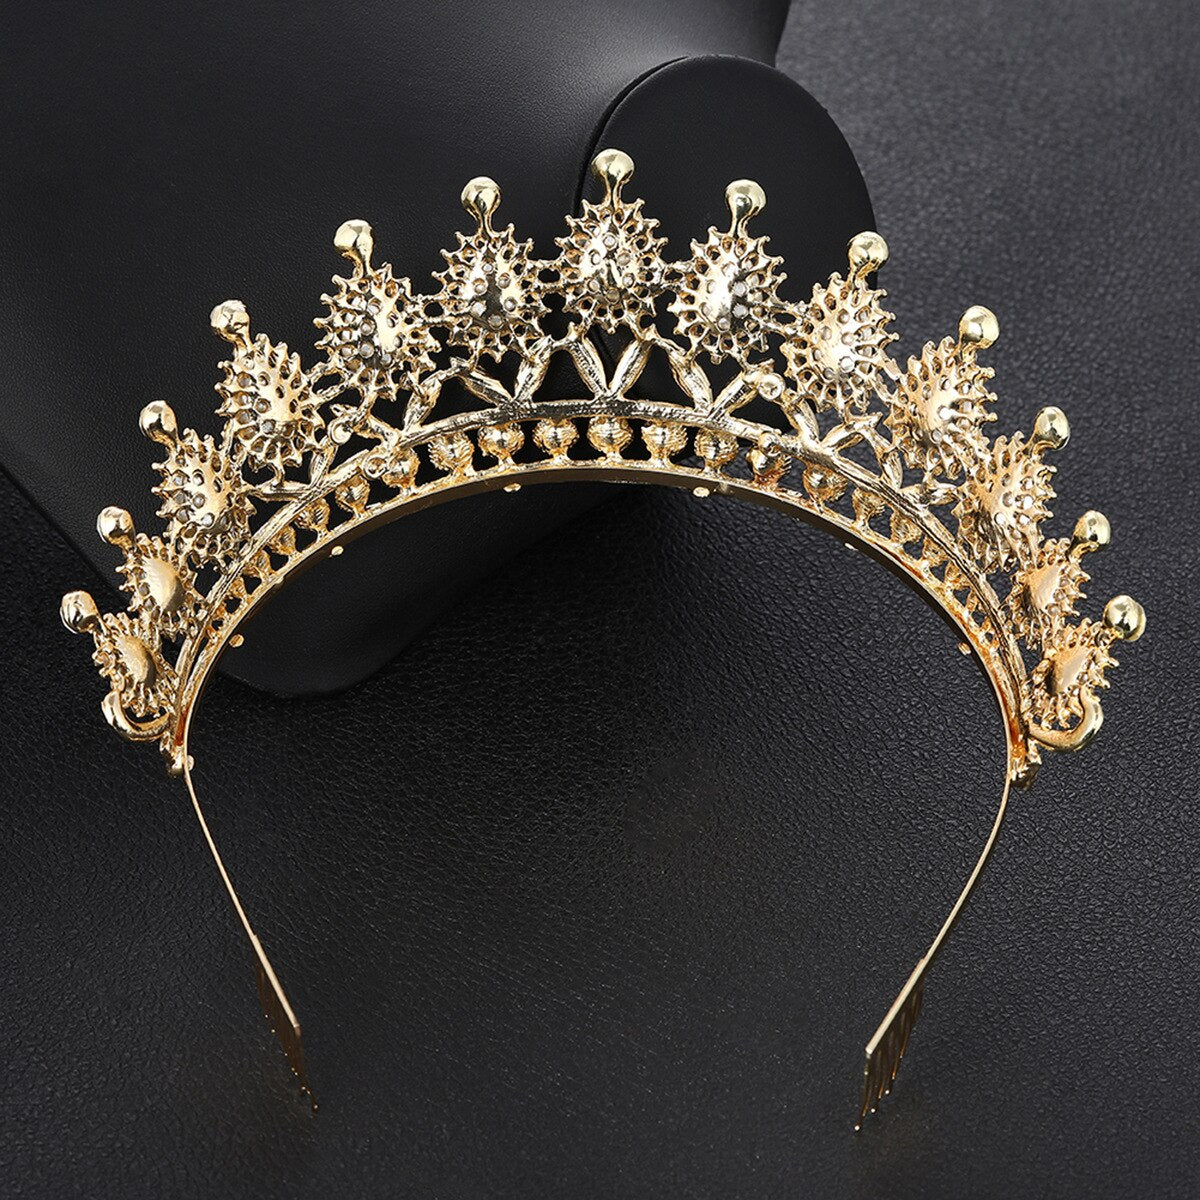 Three-Piece Alloy Necklace Crown Earrings jewelry sets